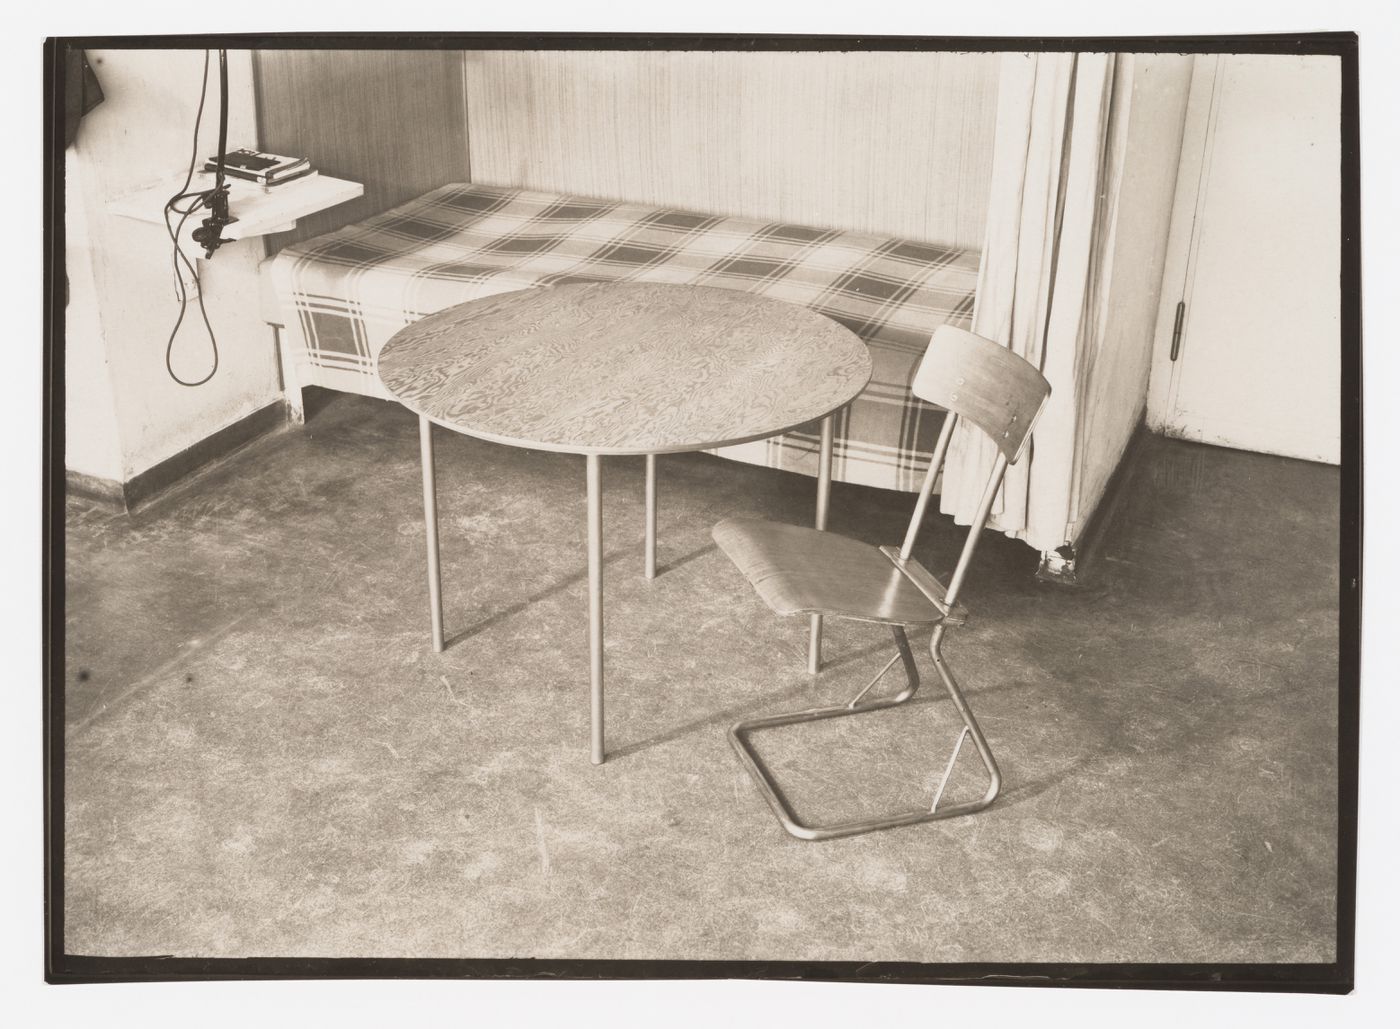 Interior view of a studio apartment in the Bauhaus building showing a bed, round table and side chair designed by Marcel Breuer, Dessau, Germany